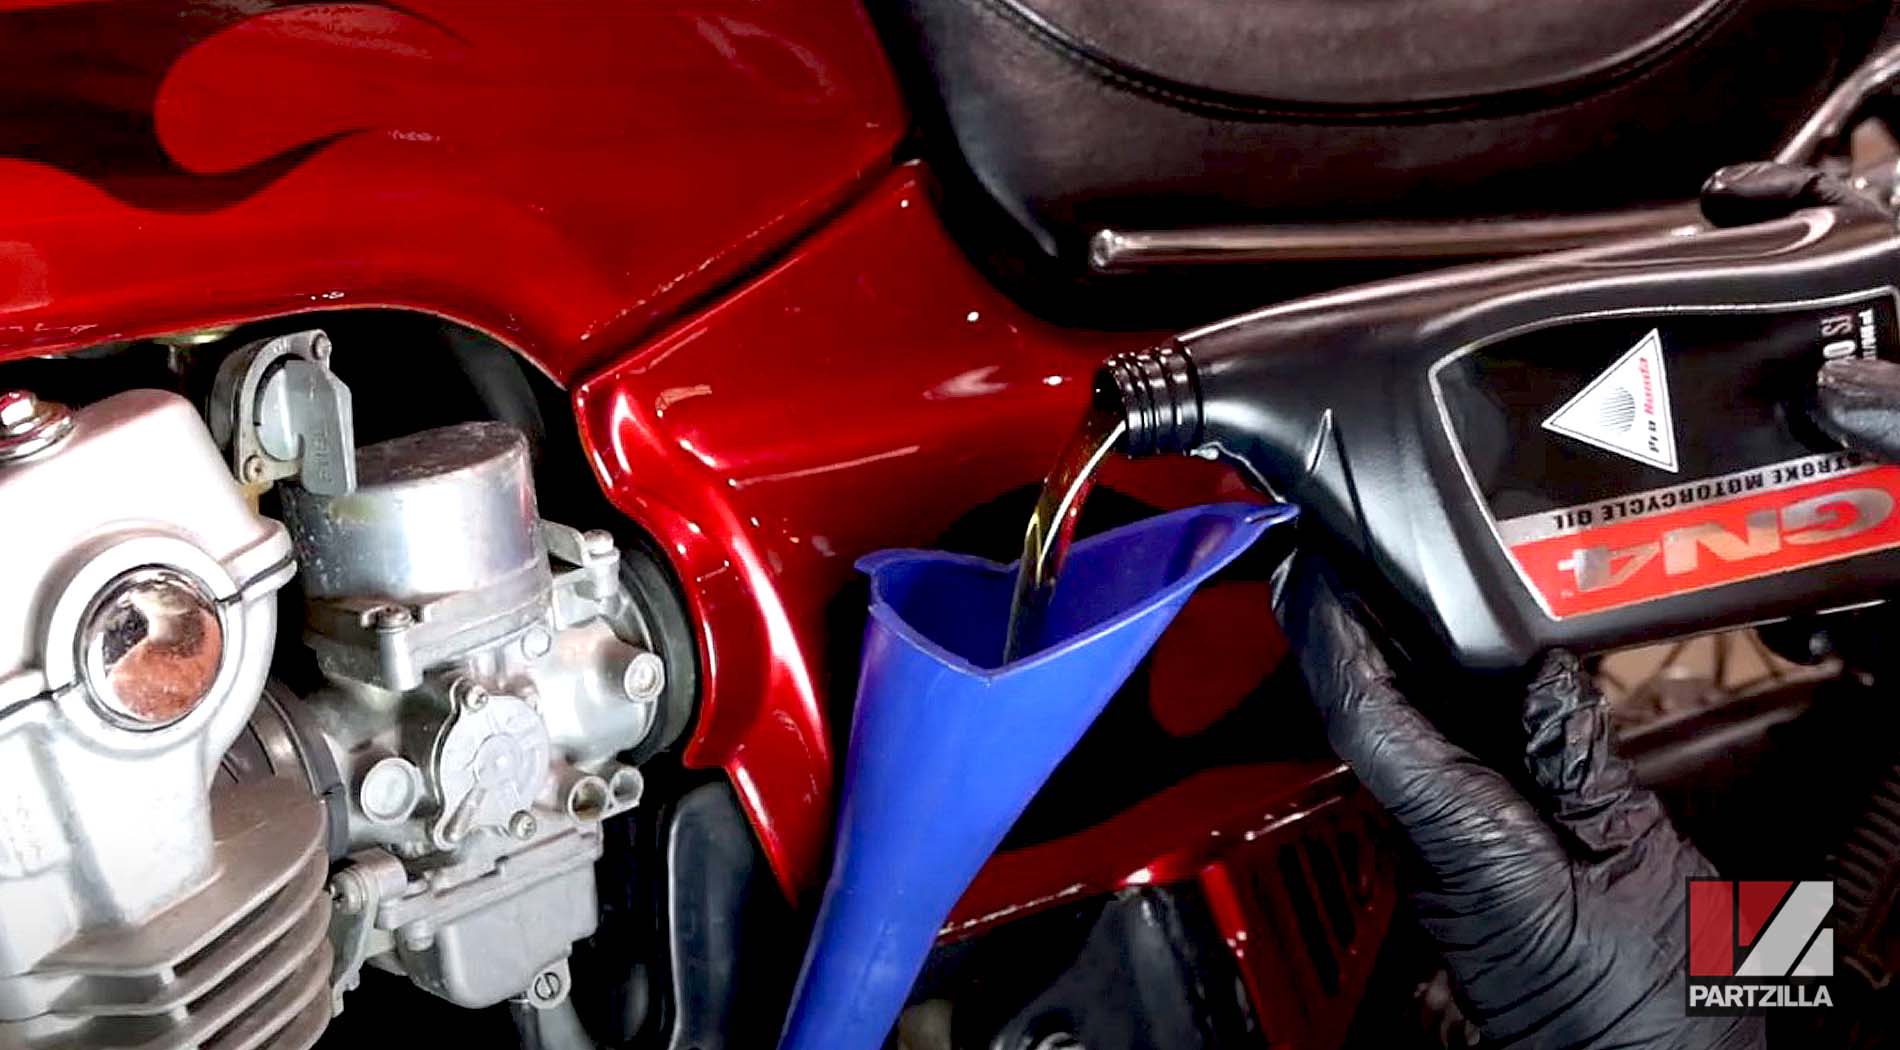 Motorcycle oil change mistakes to avoid